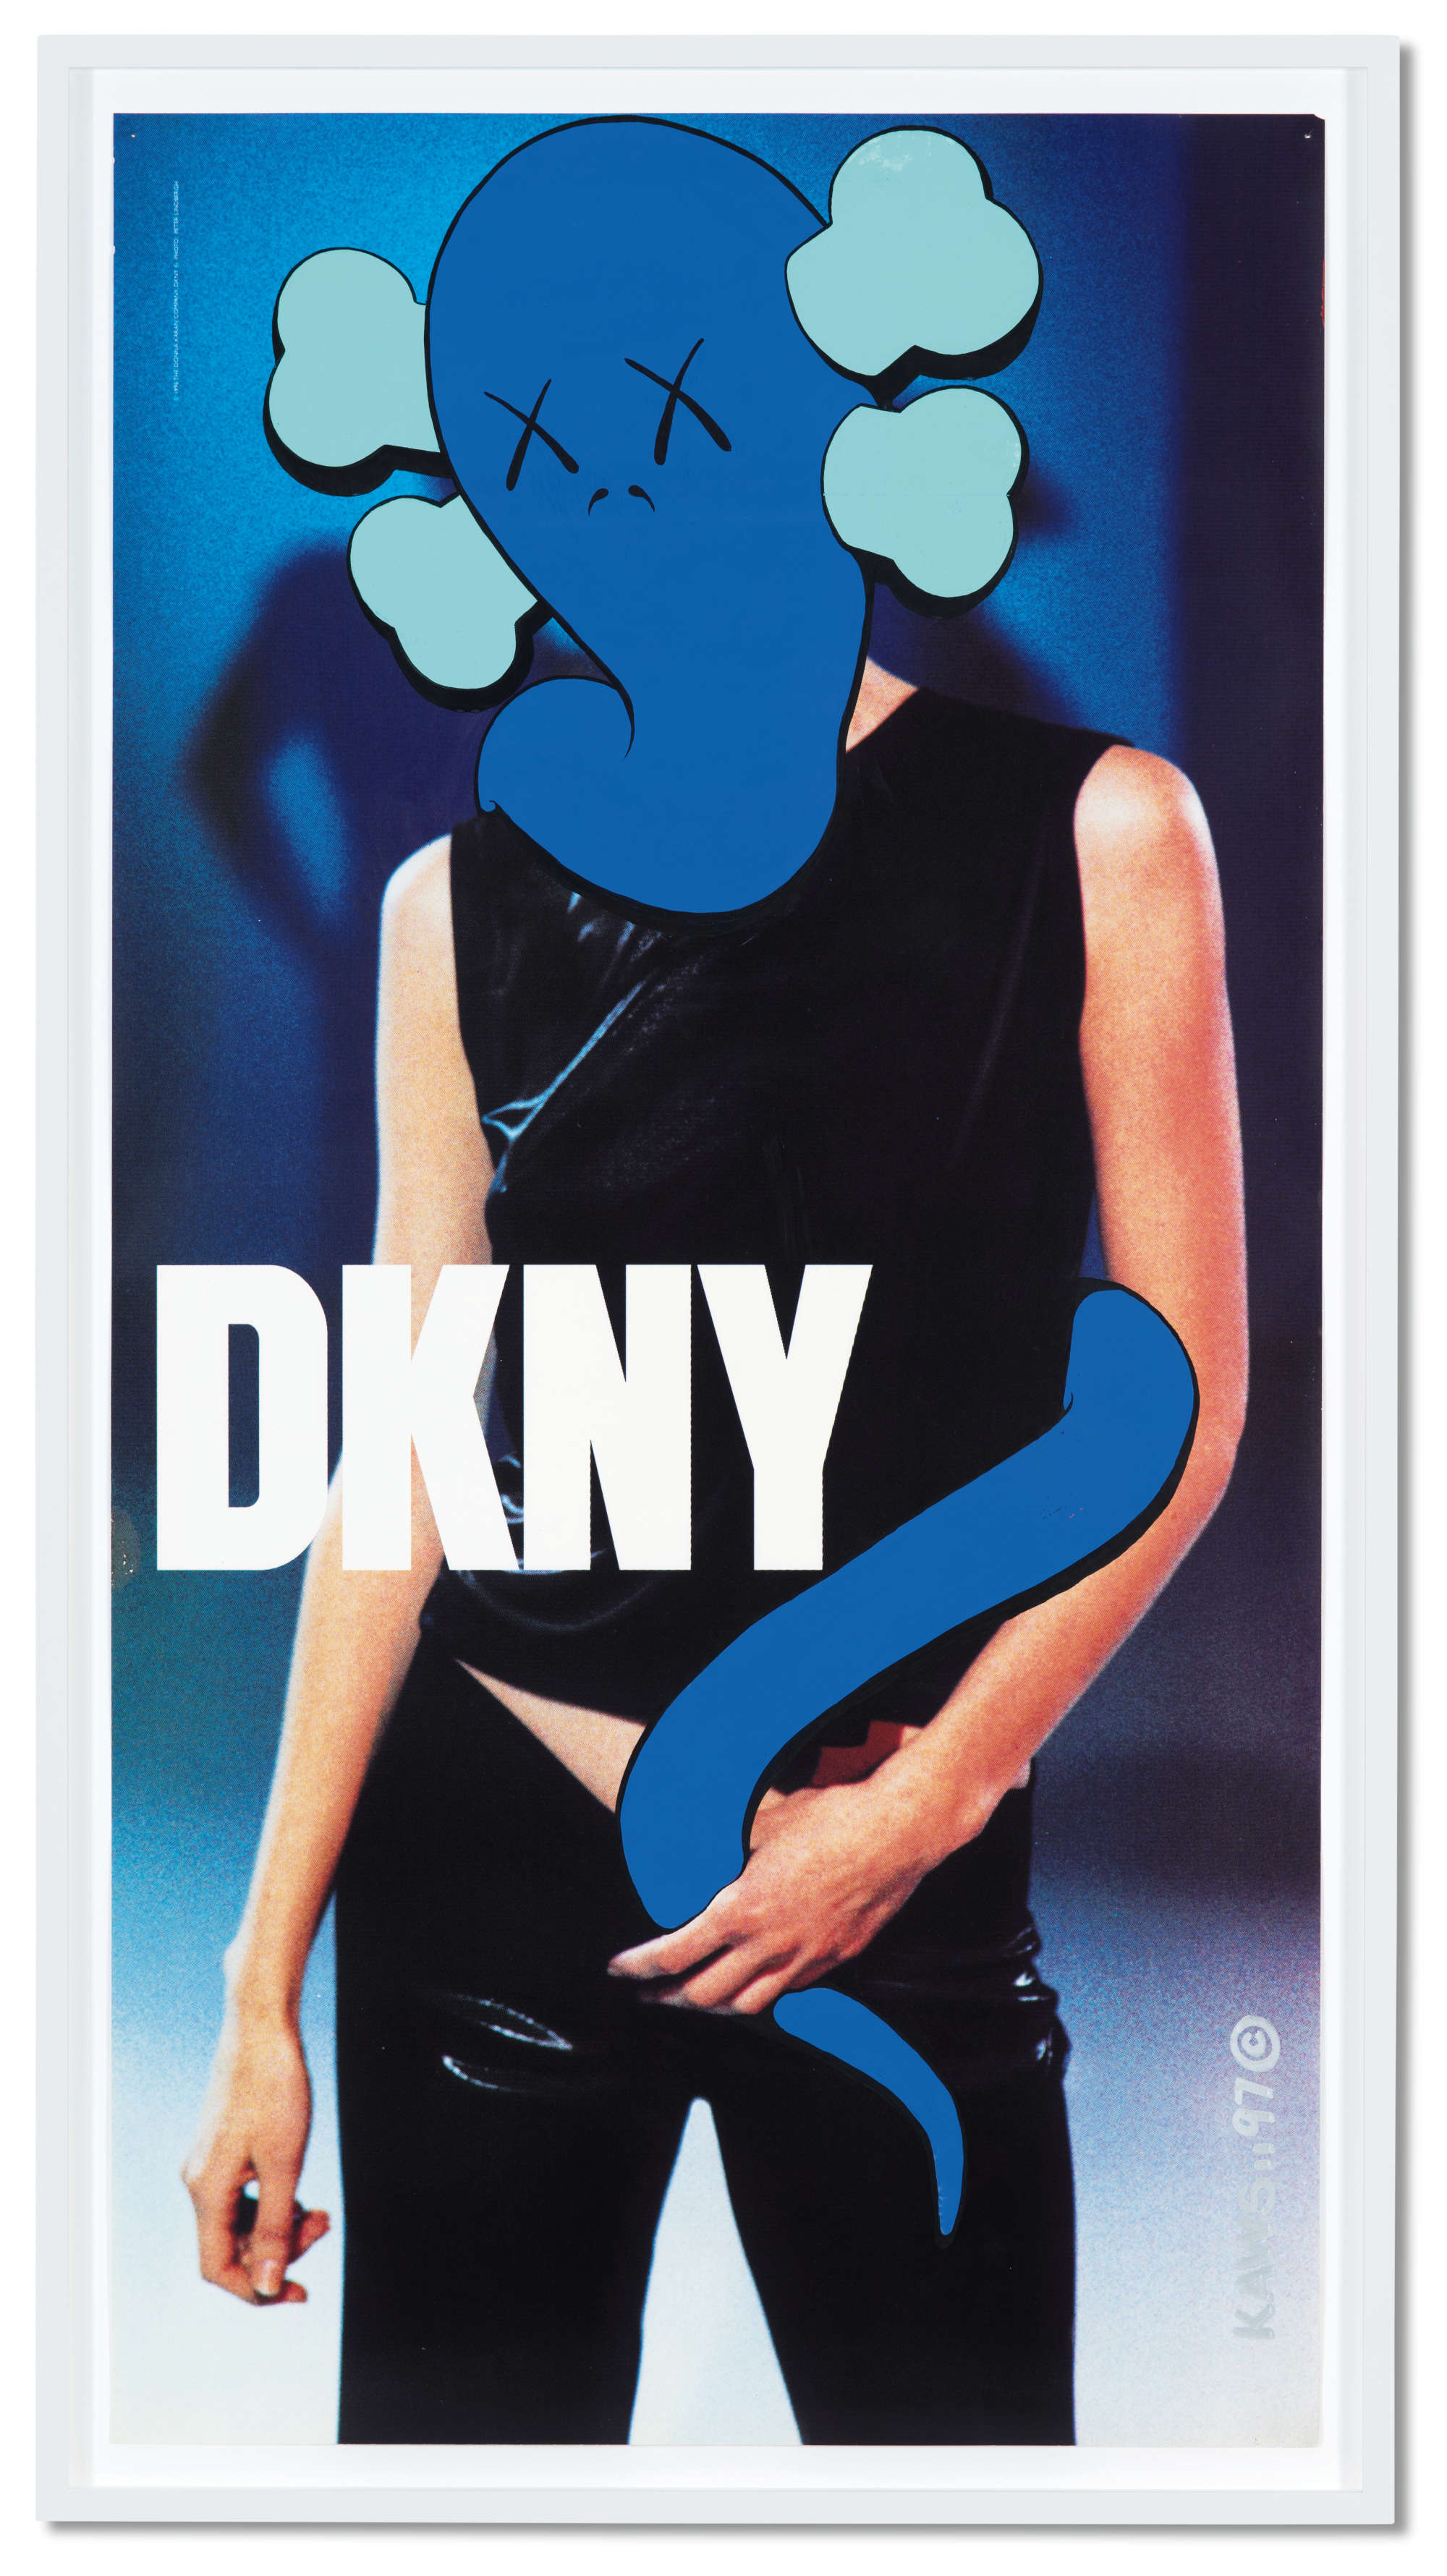 UNTITLED (DKNY), 1997, Acrylic on existing advertising poster. Photo: Farwad Owrang / © KAWS 